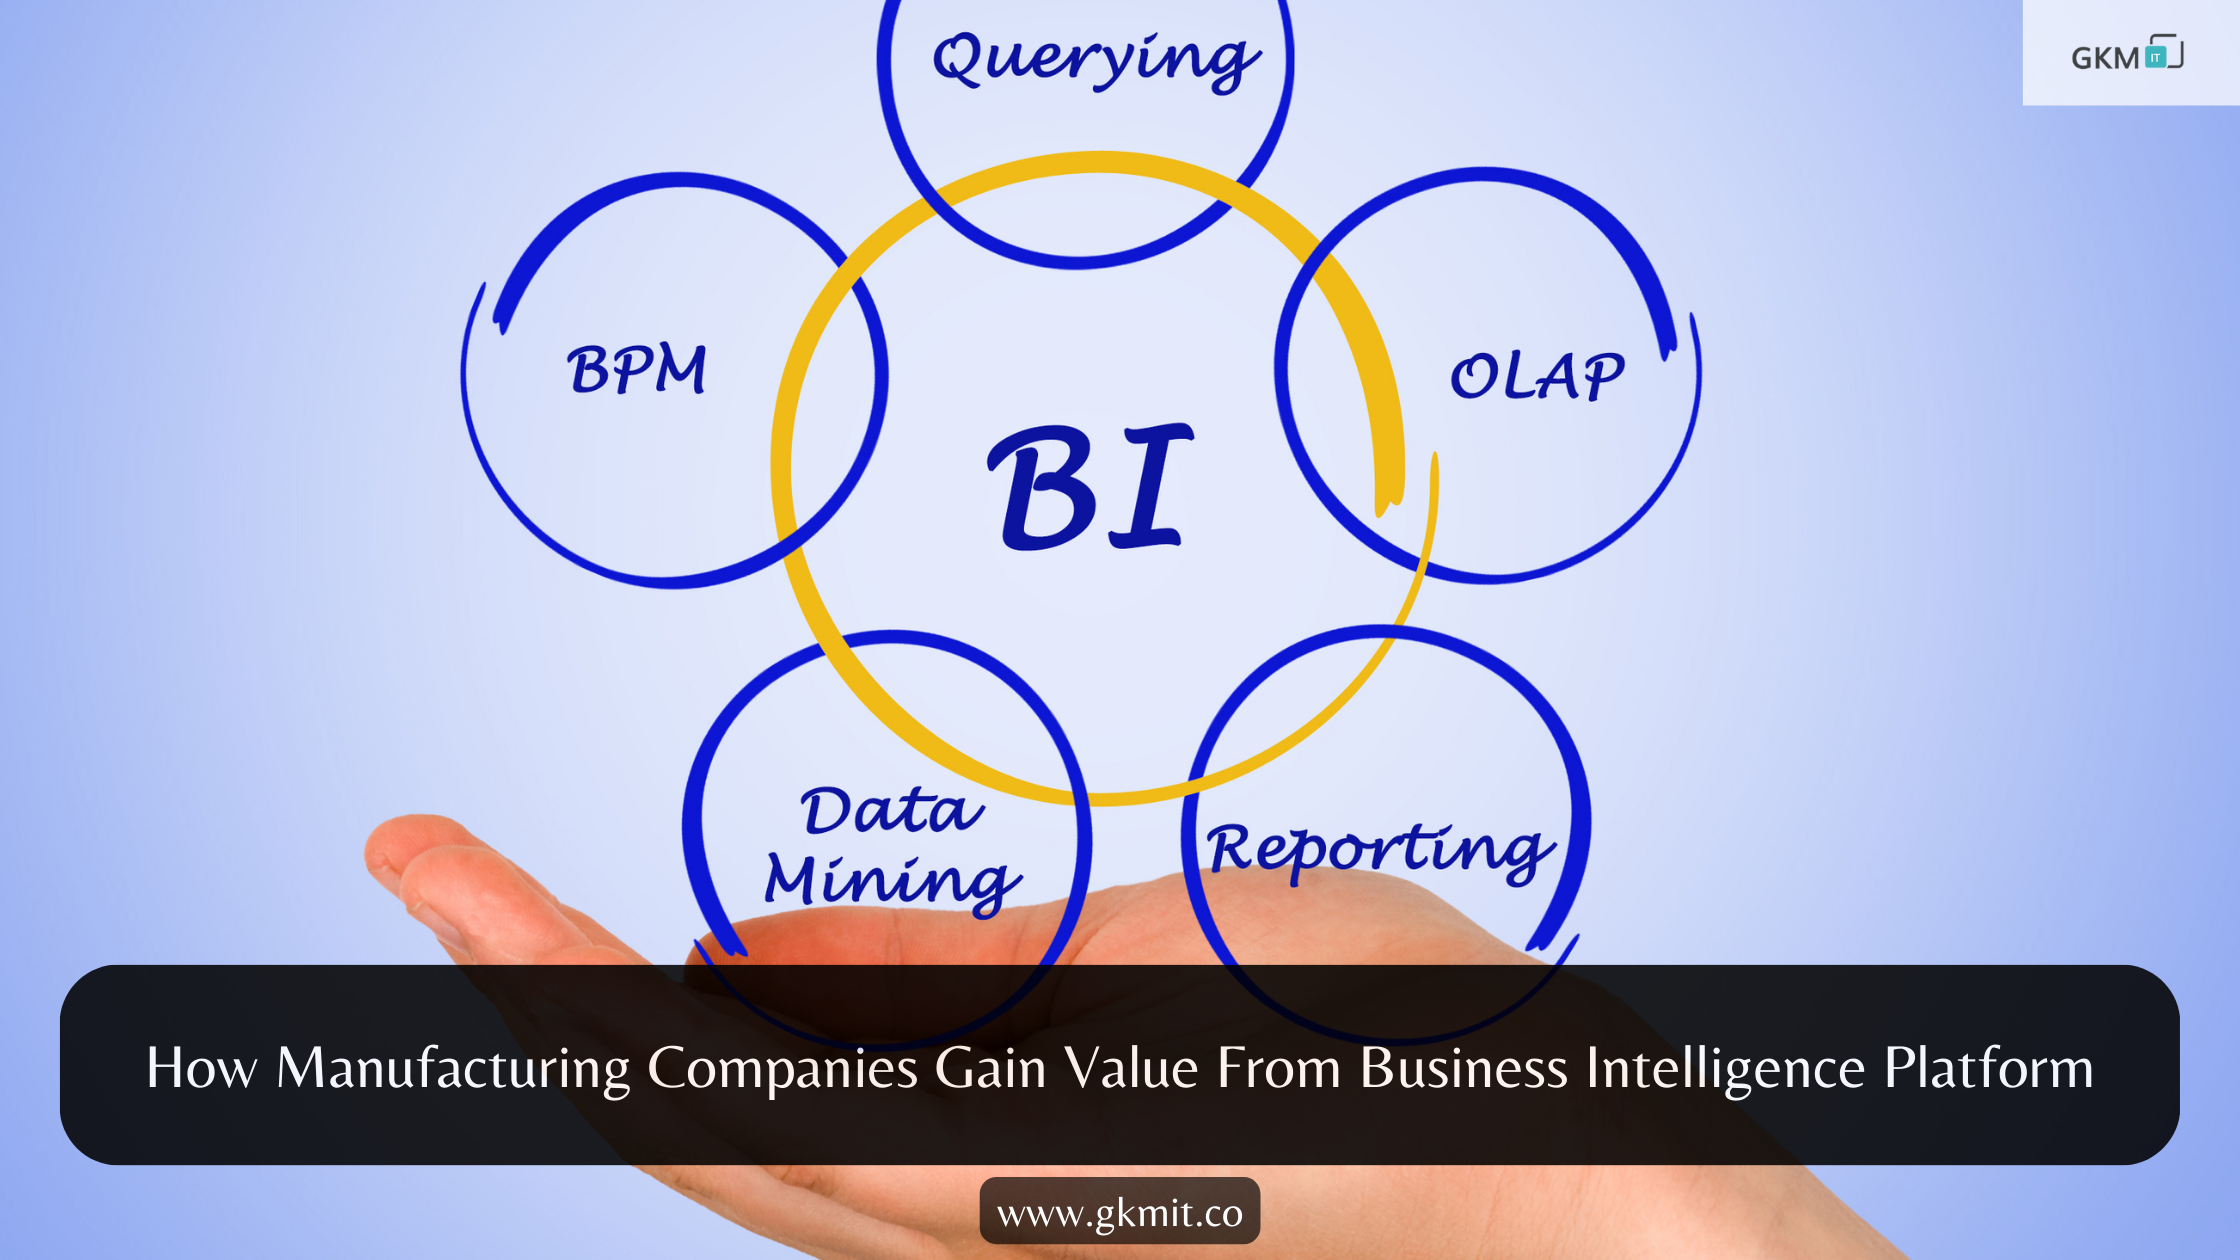 how-manufacturing-companies-gain-value-from-business-intelligence-gkmit